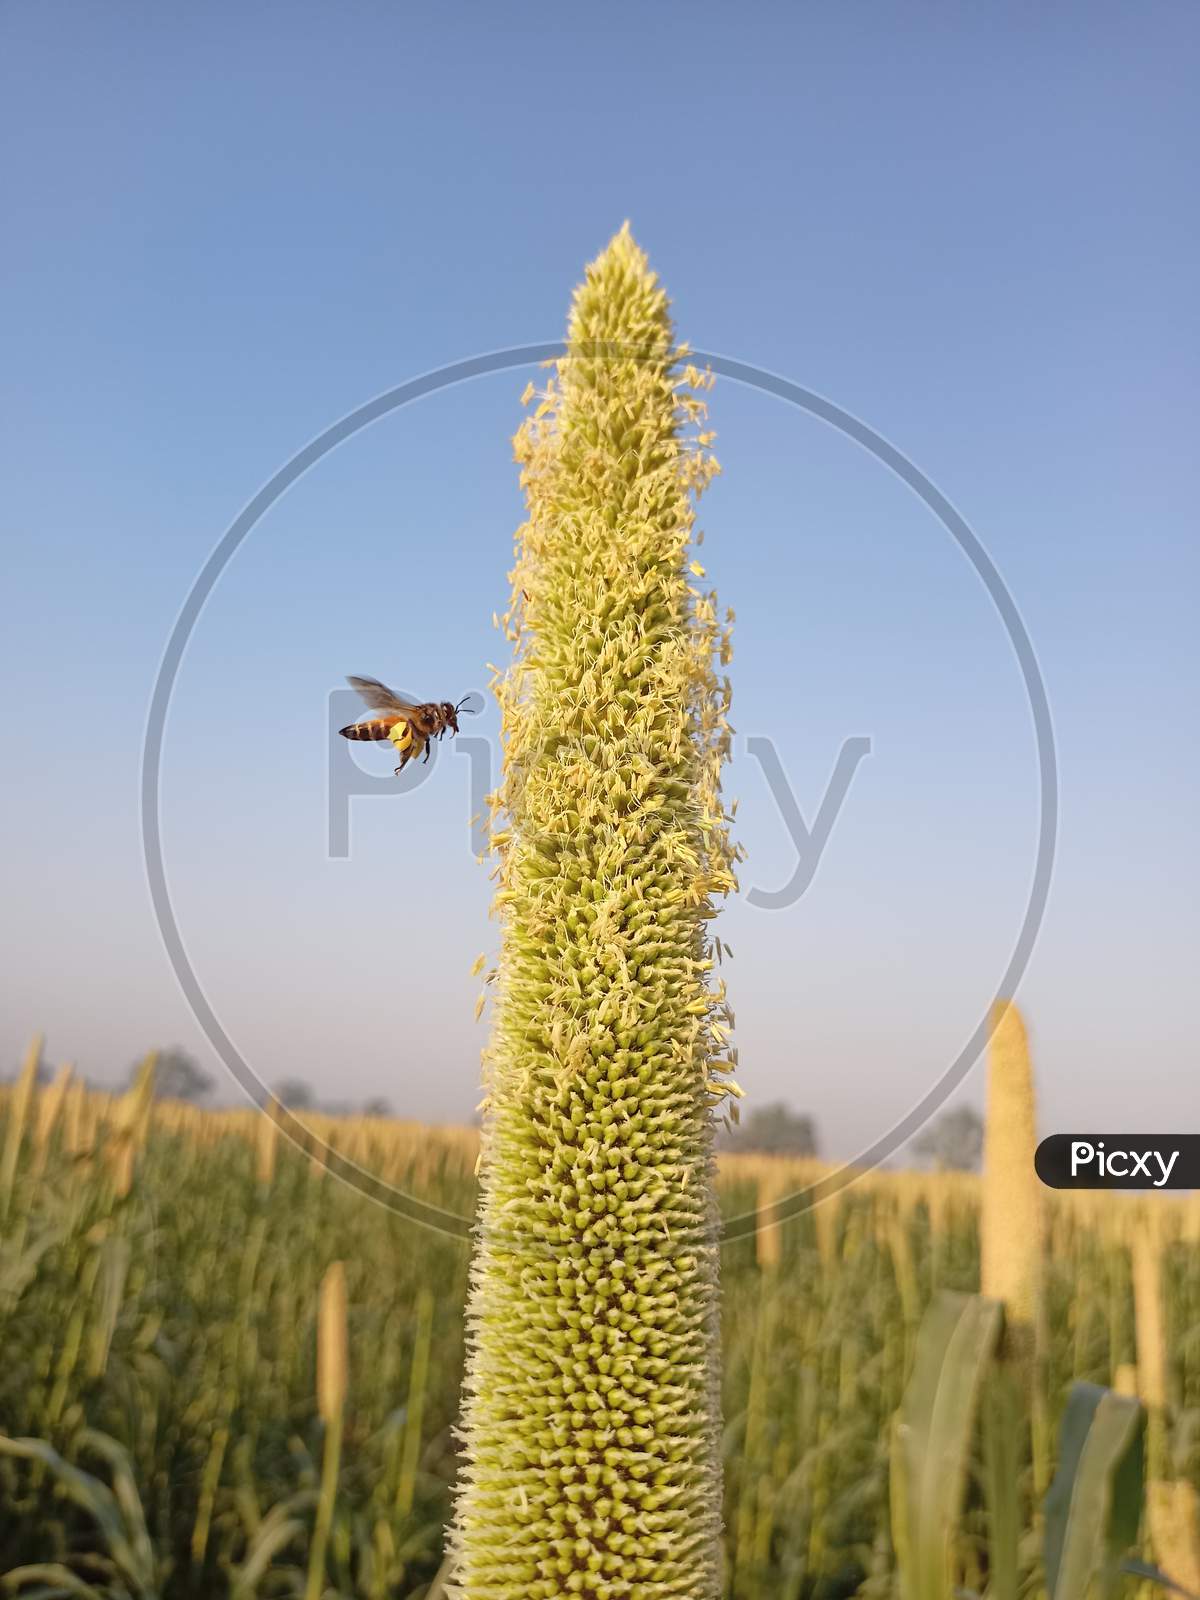 Bee with millet